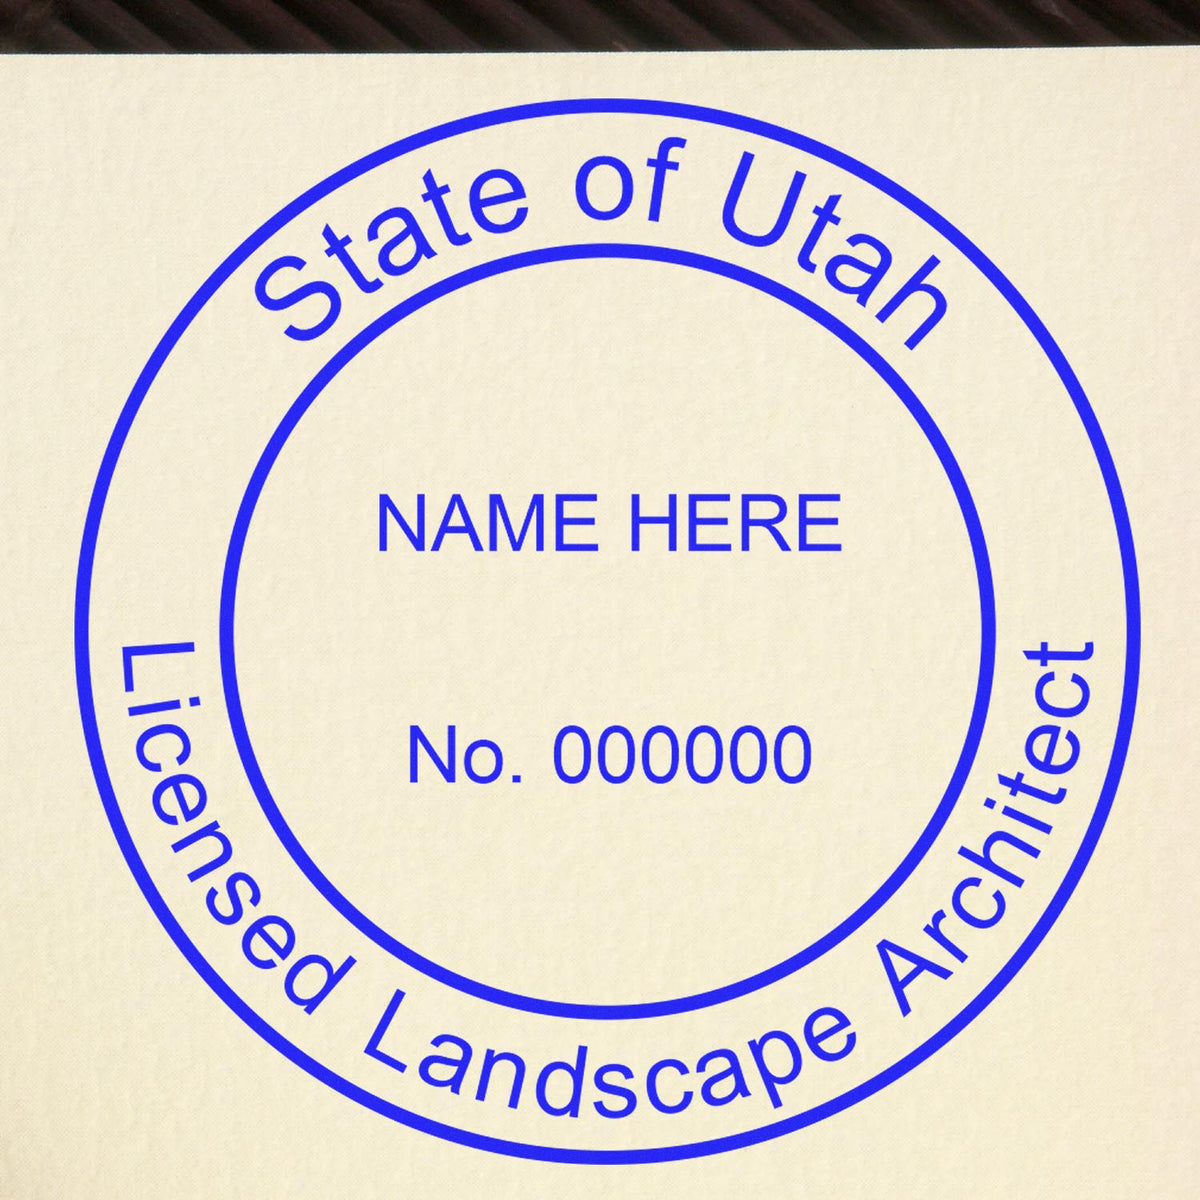 This paper is stamped with a sample imprint of the Self-Inking Utah Landscape Architect Stamp, signifying its quality and reliability.